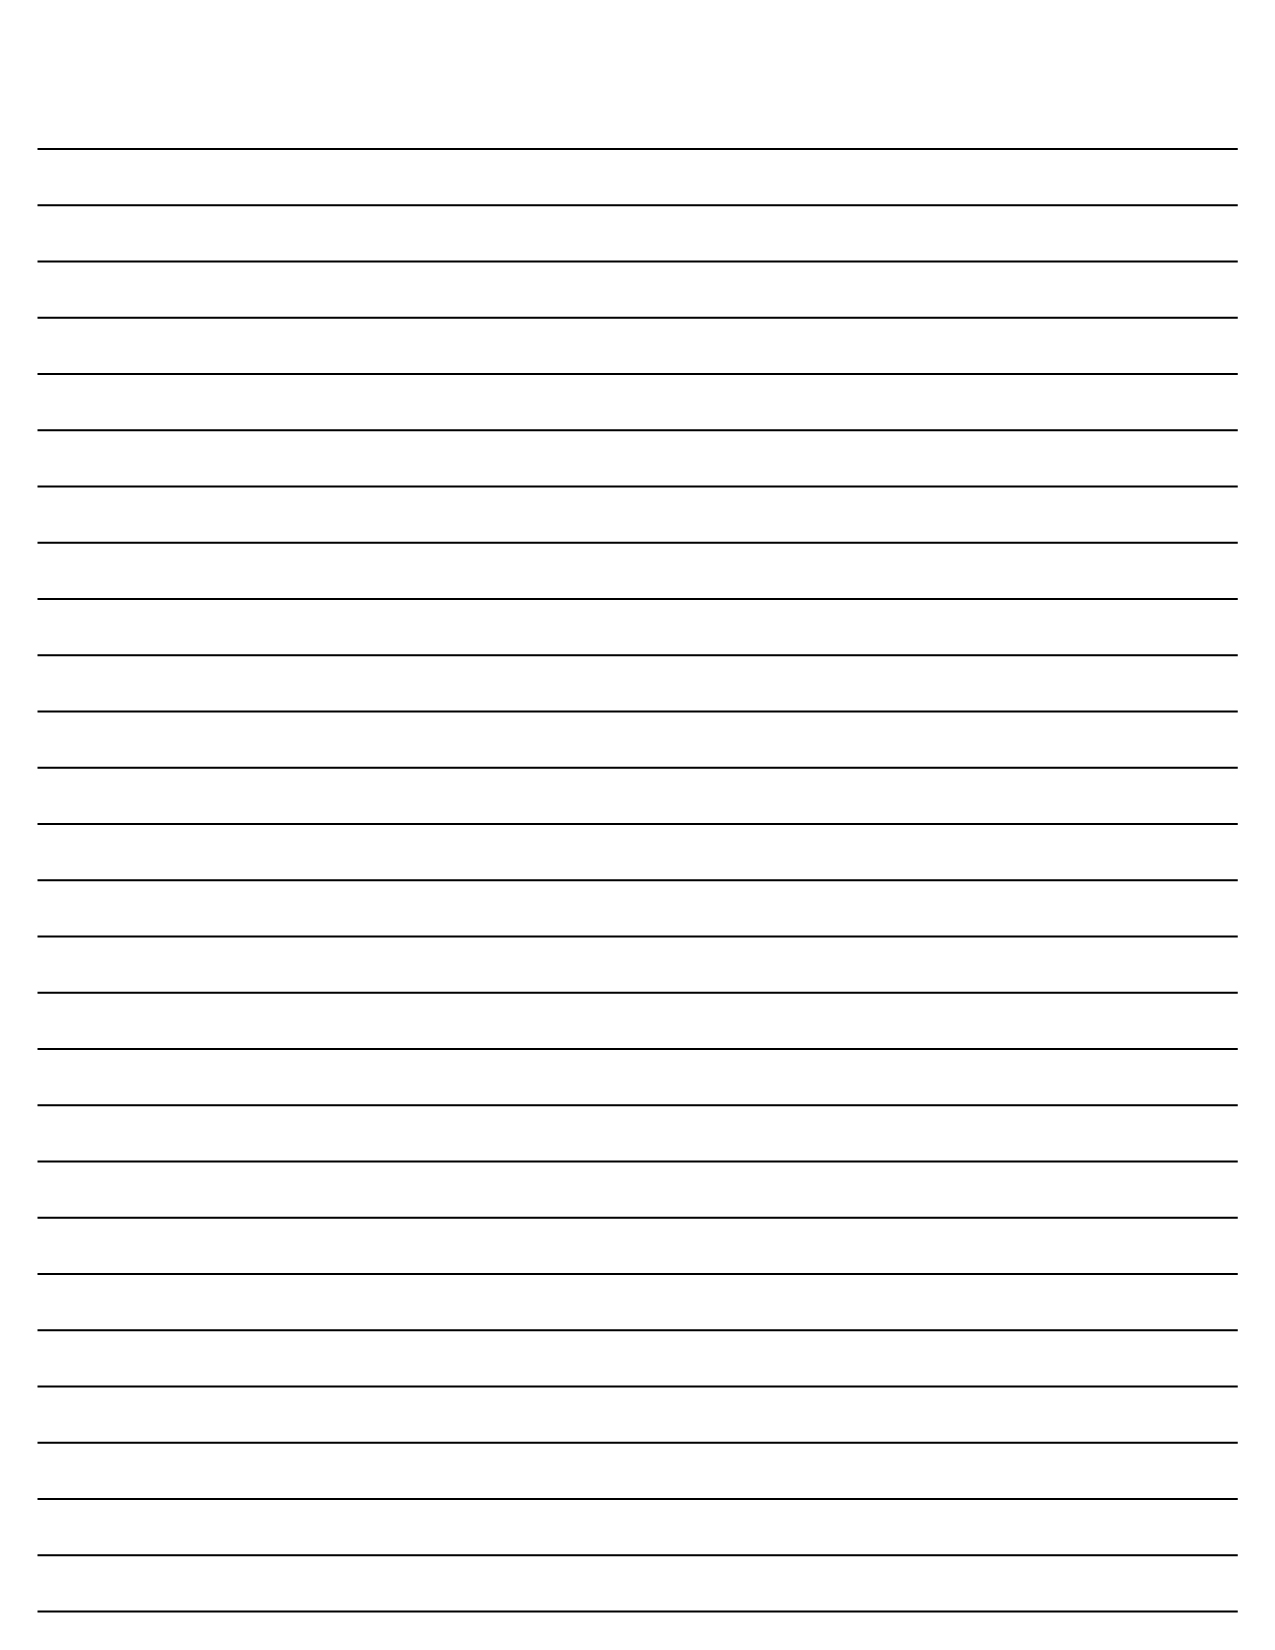 Primary Writing Paper Printable 1000 images about printable